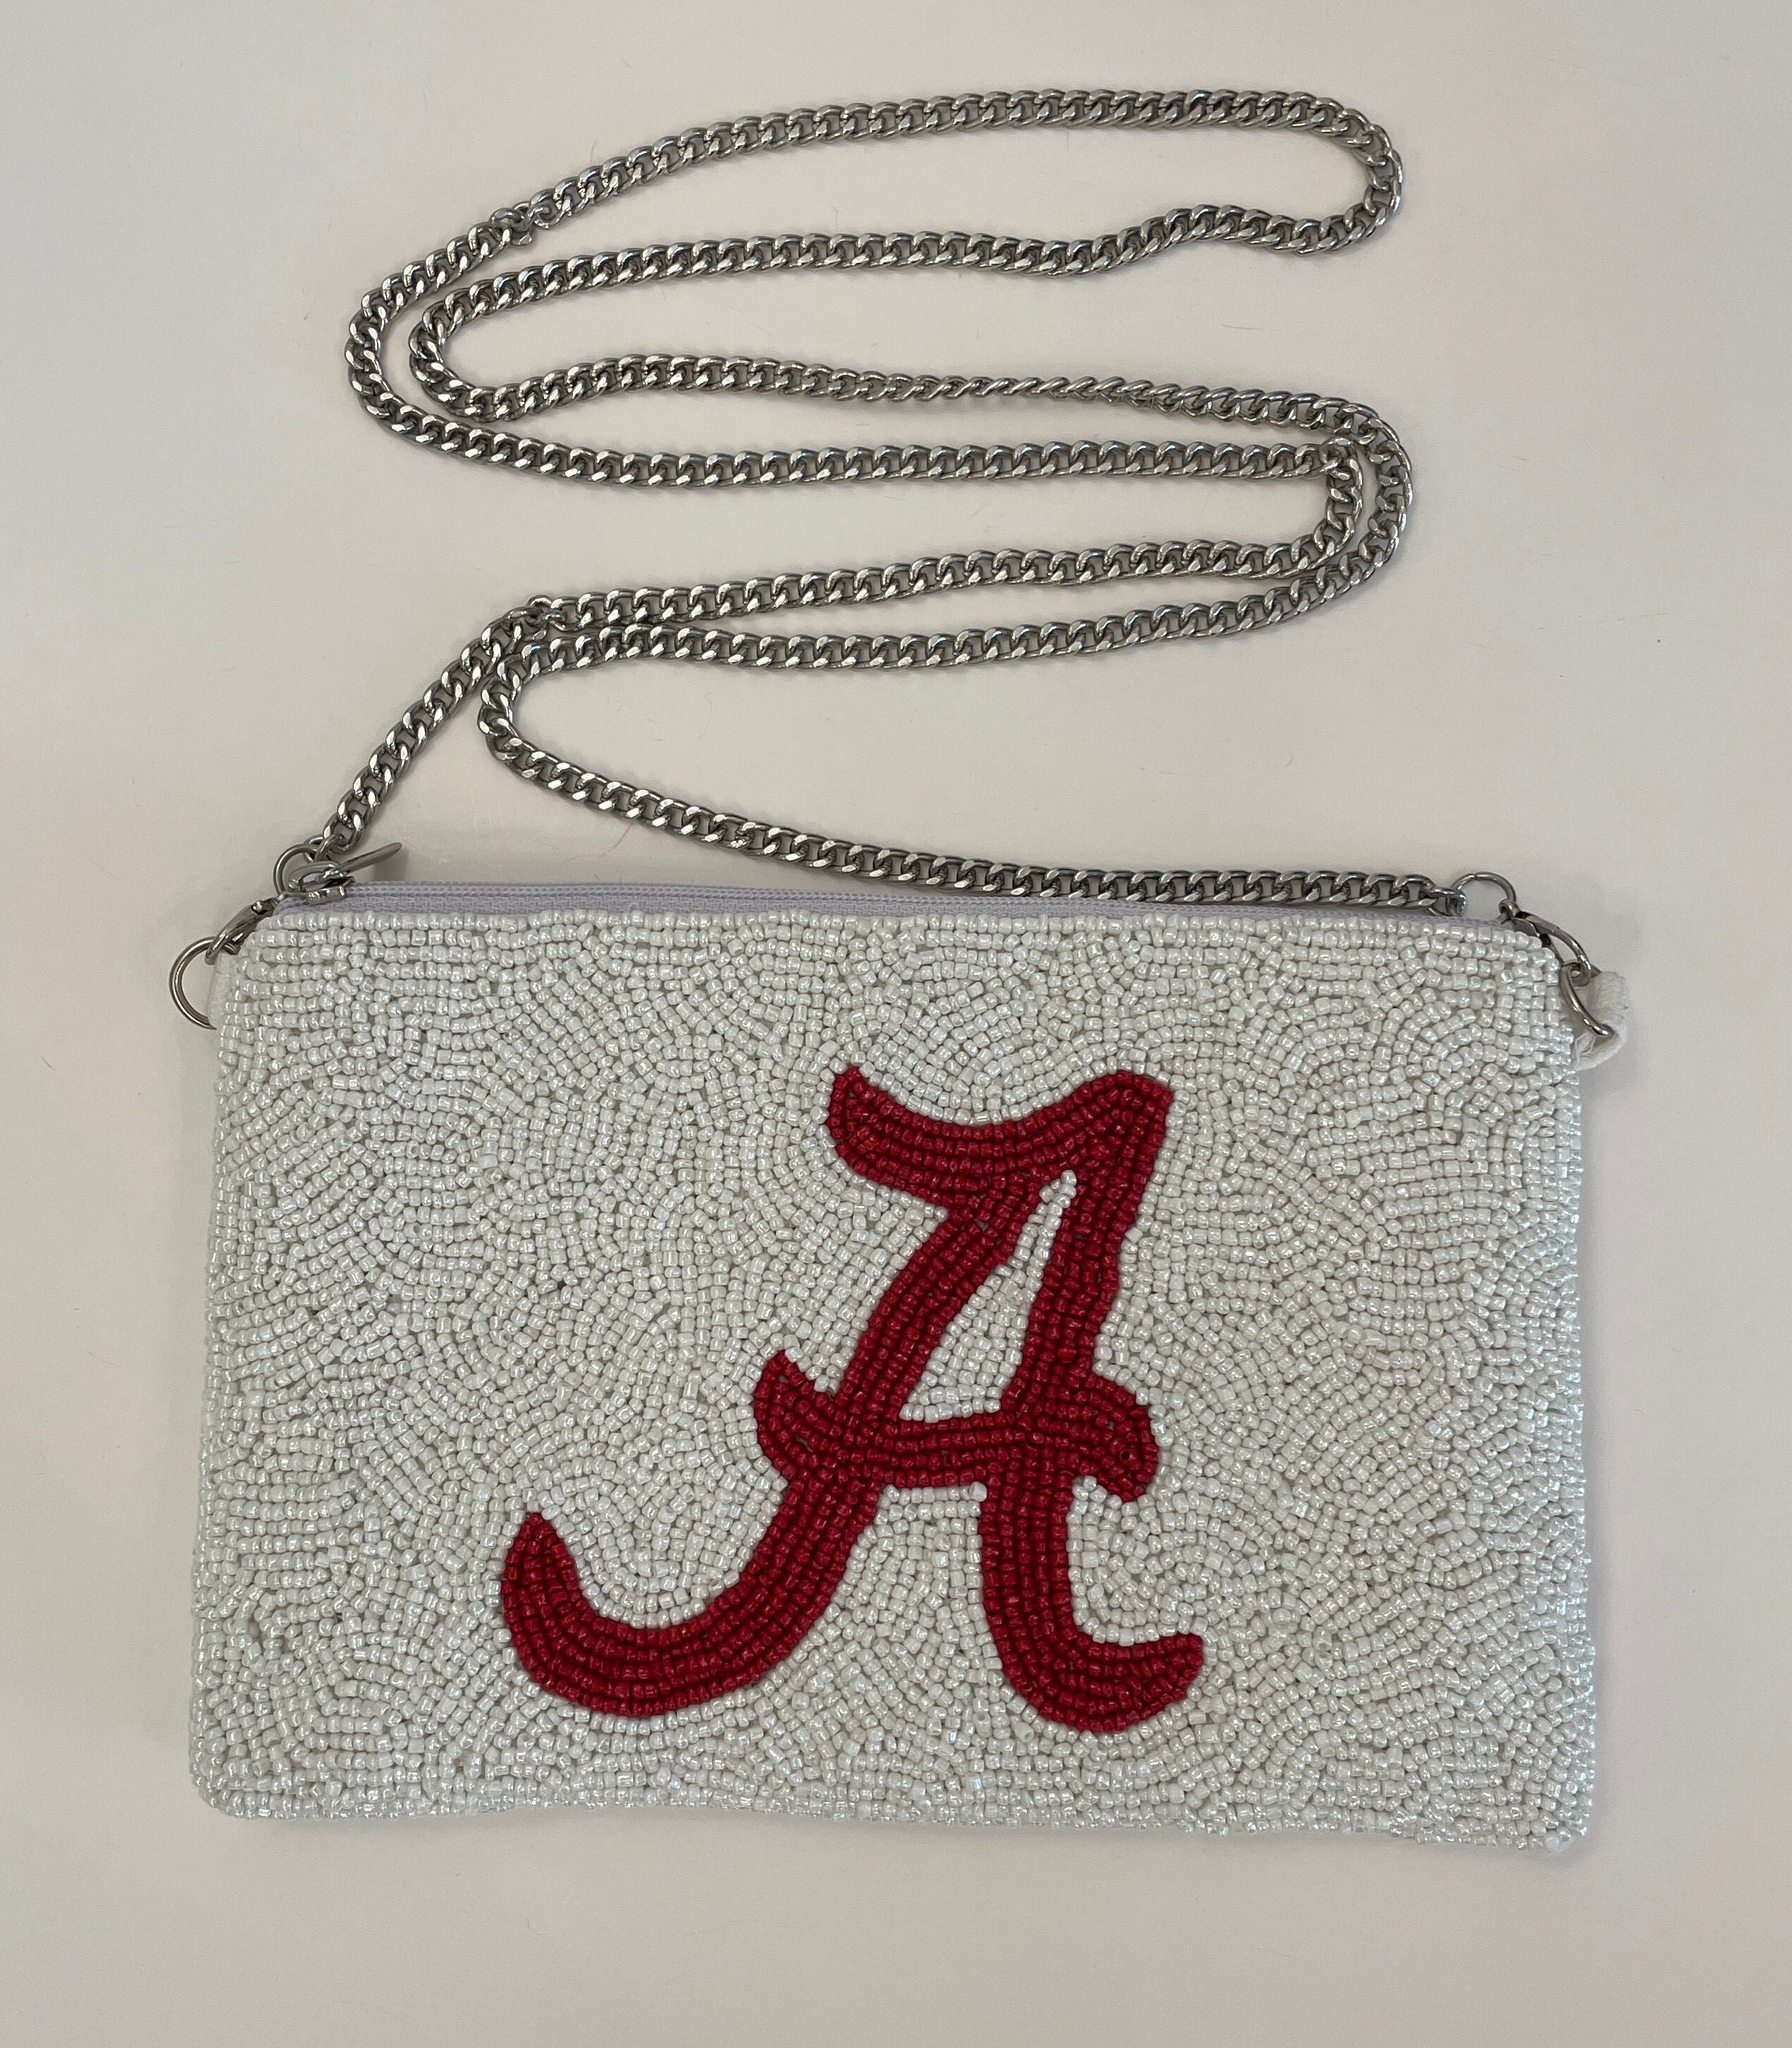 University of Alabama Bridget Clear Purse with 2 Straps in Clear/Crimson Size 8 x 6 x 2